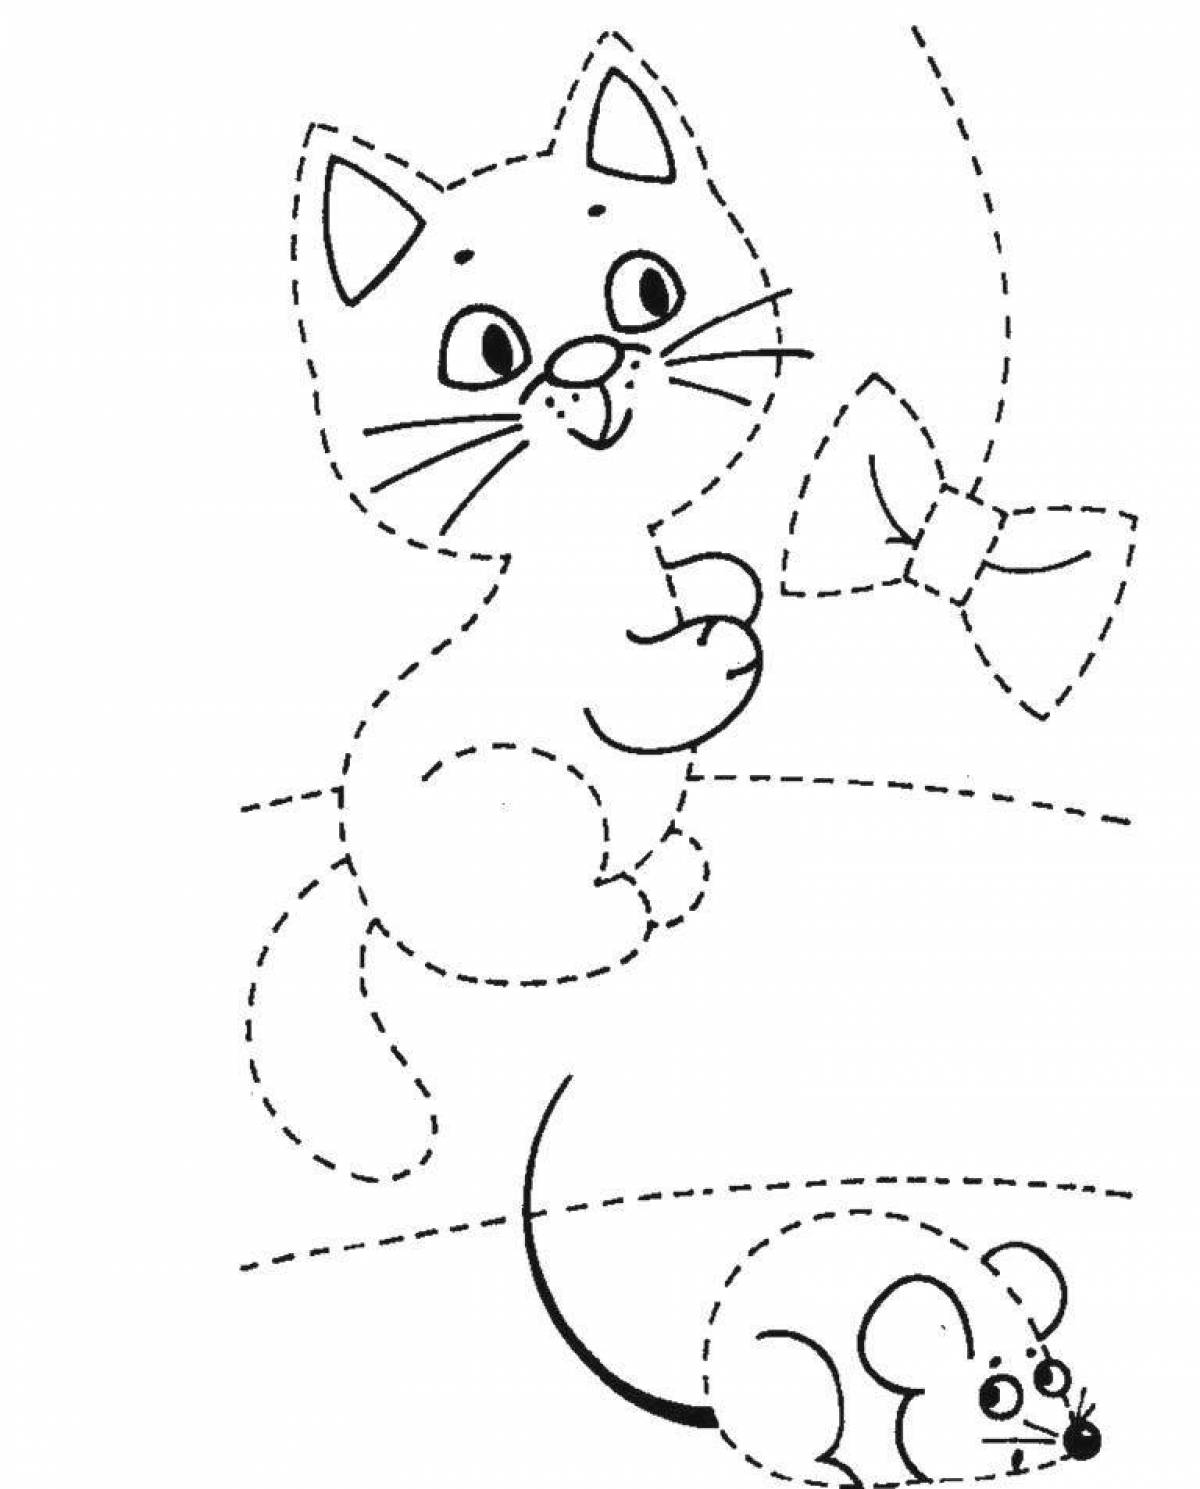 Joyful coloring cat for children 3-4 years old